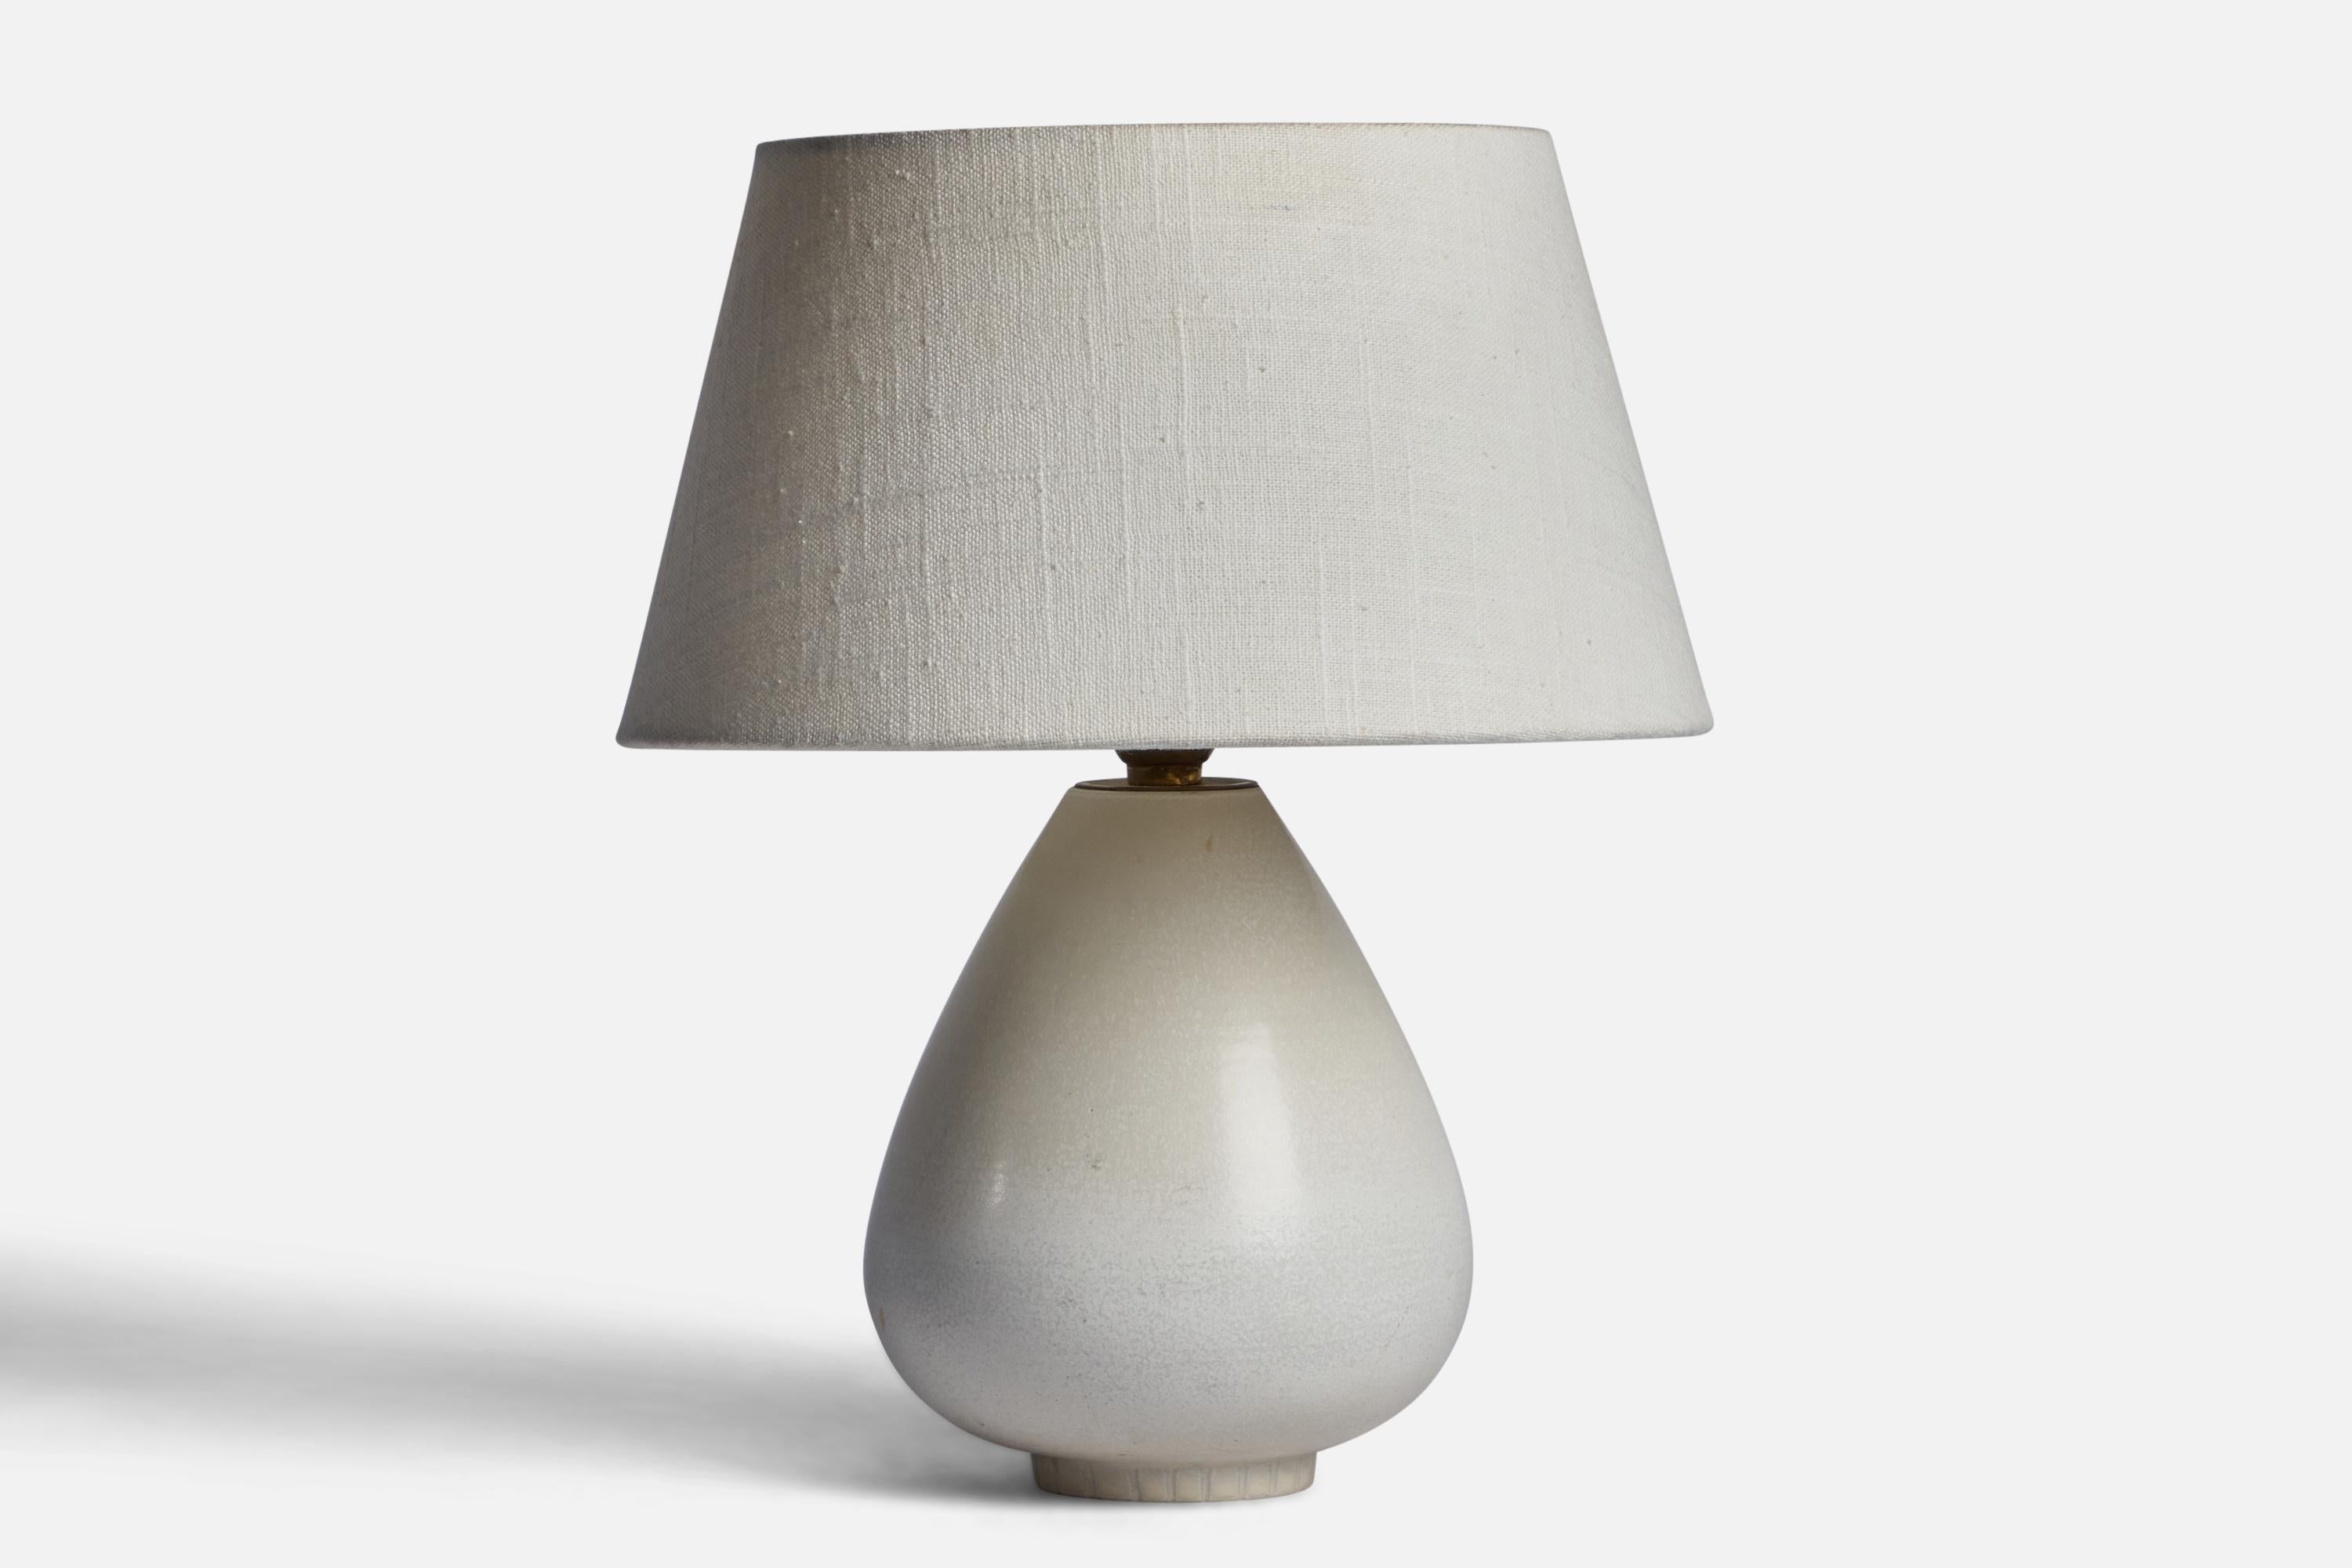 An off-white-glazed stoneware table lamp designed by Gunnar Nylund and produced by Rörstrand, Sweden, 1940s.

Dimensions of Lamp (inches): 9.25” H x 6” Diameter
Dimensions of Shade (inches): 7” Top Diameter x 10” Bottom Diameter x 5.5” H 
Dimensions